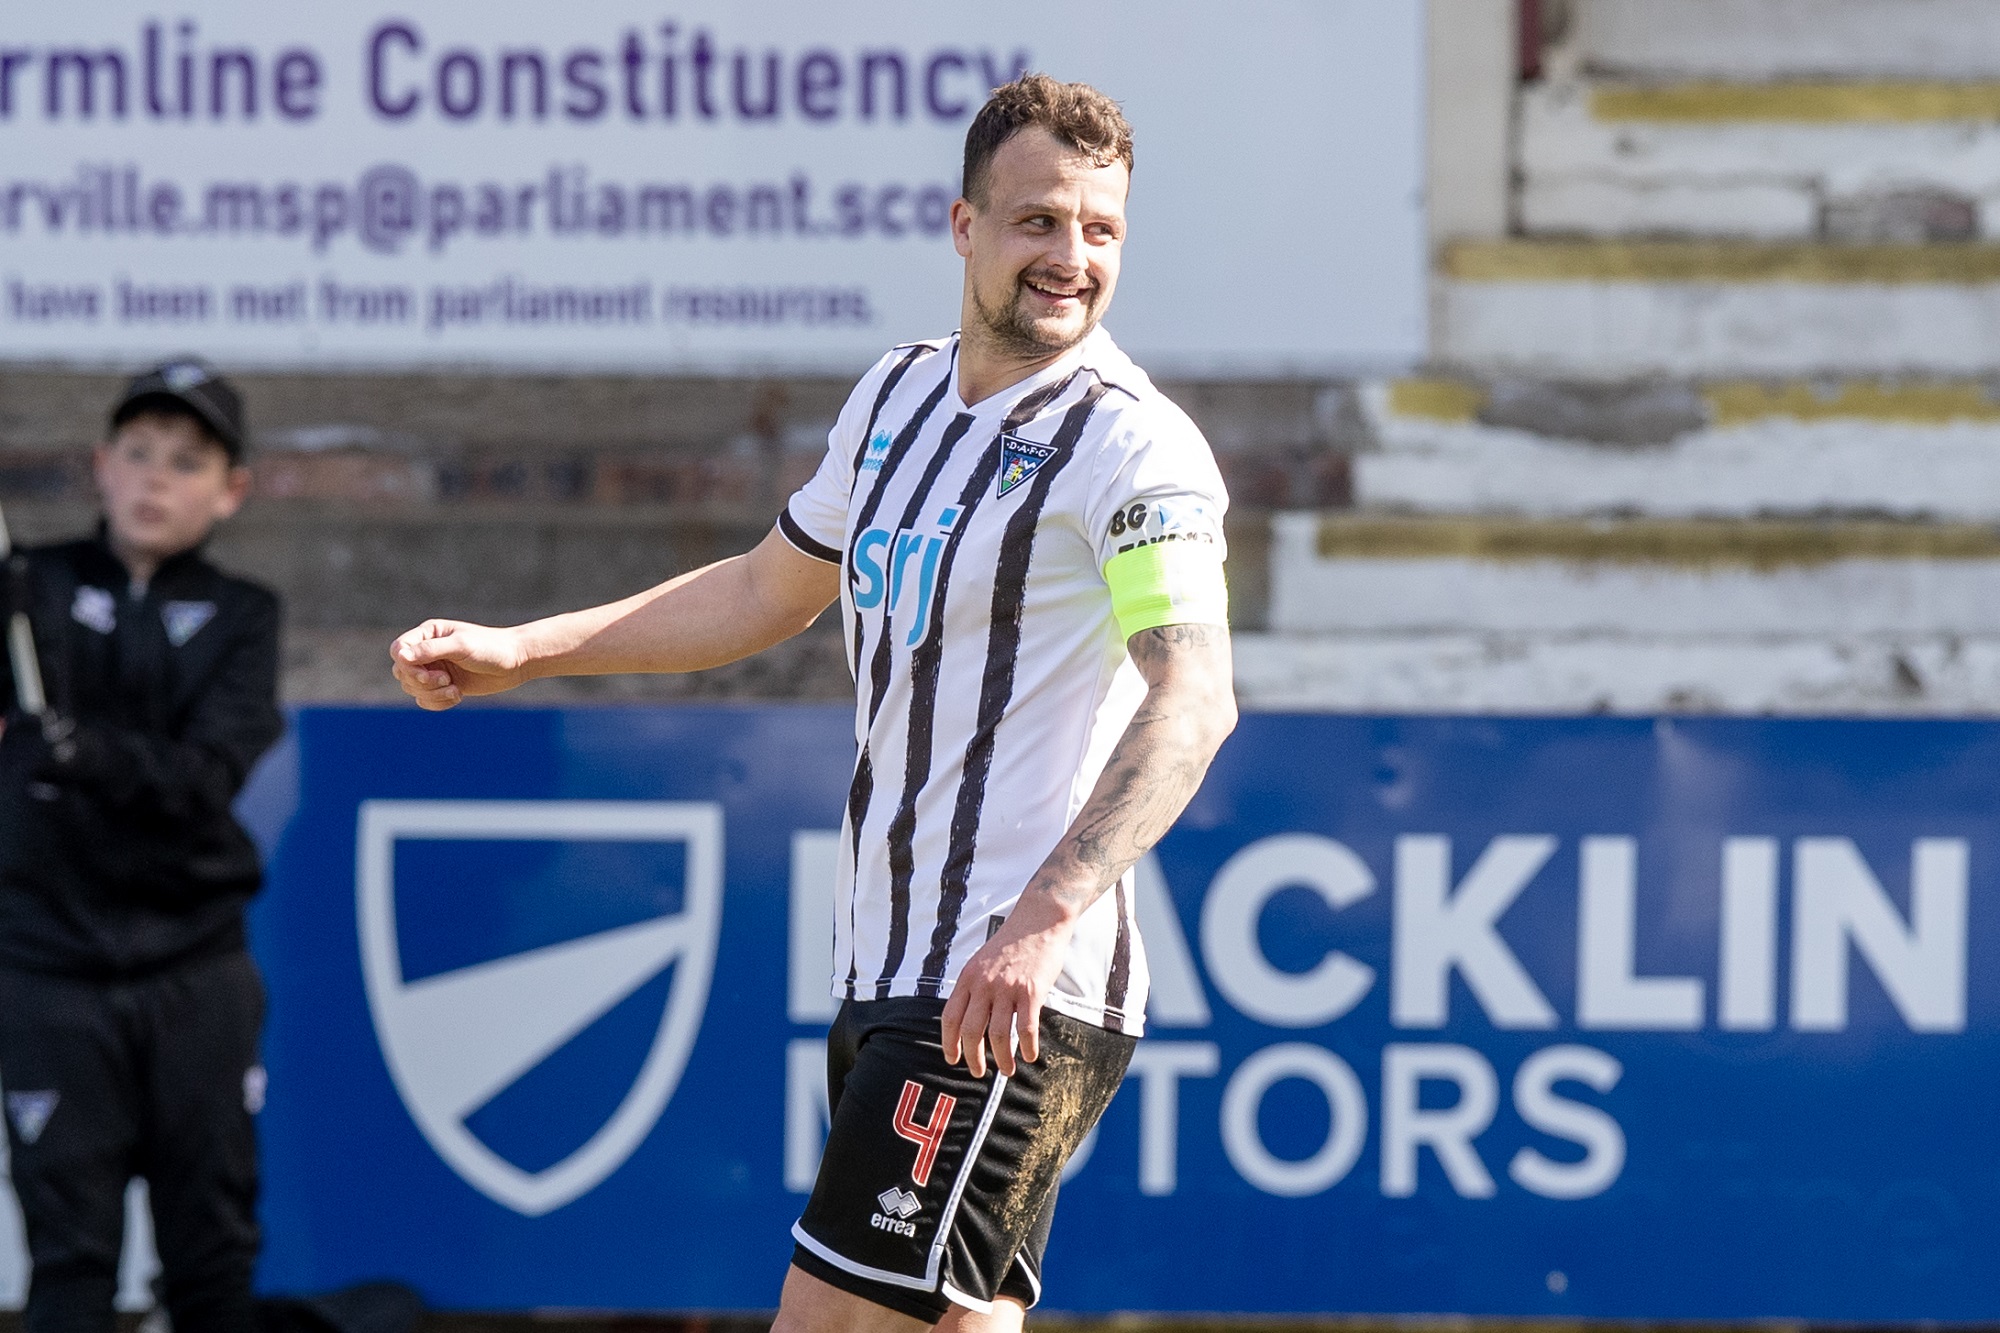 Dunfermline's Kyle Benedictus says they'll strive for better